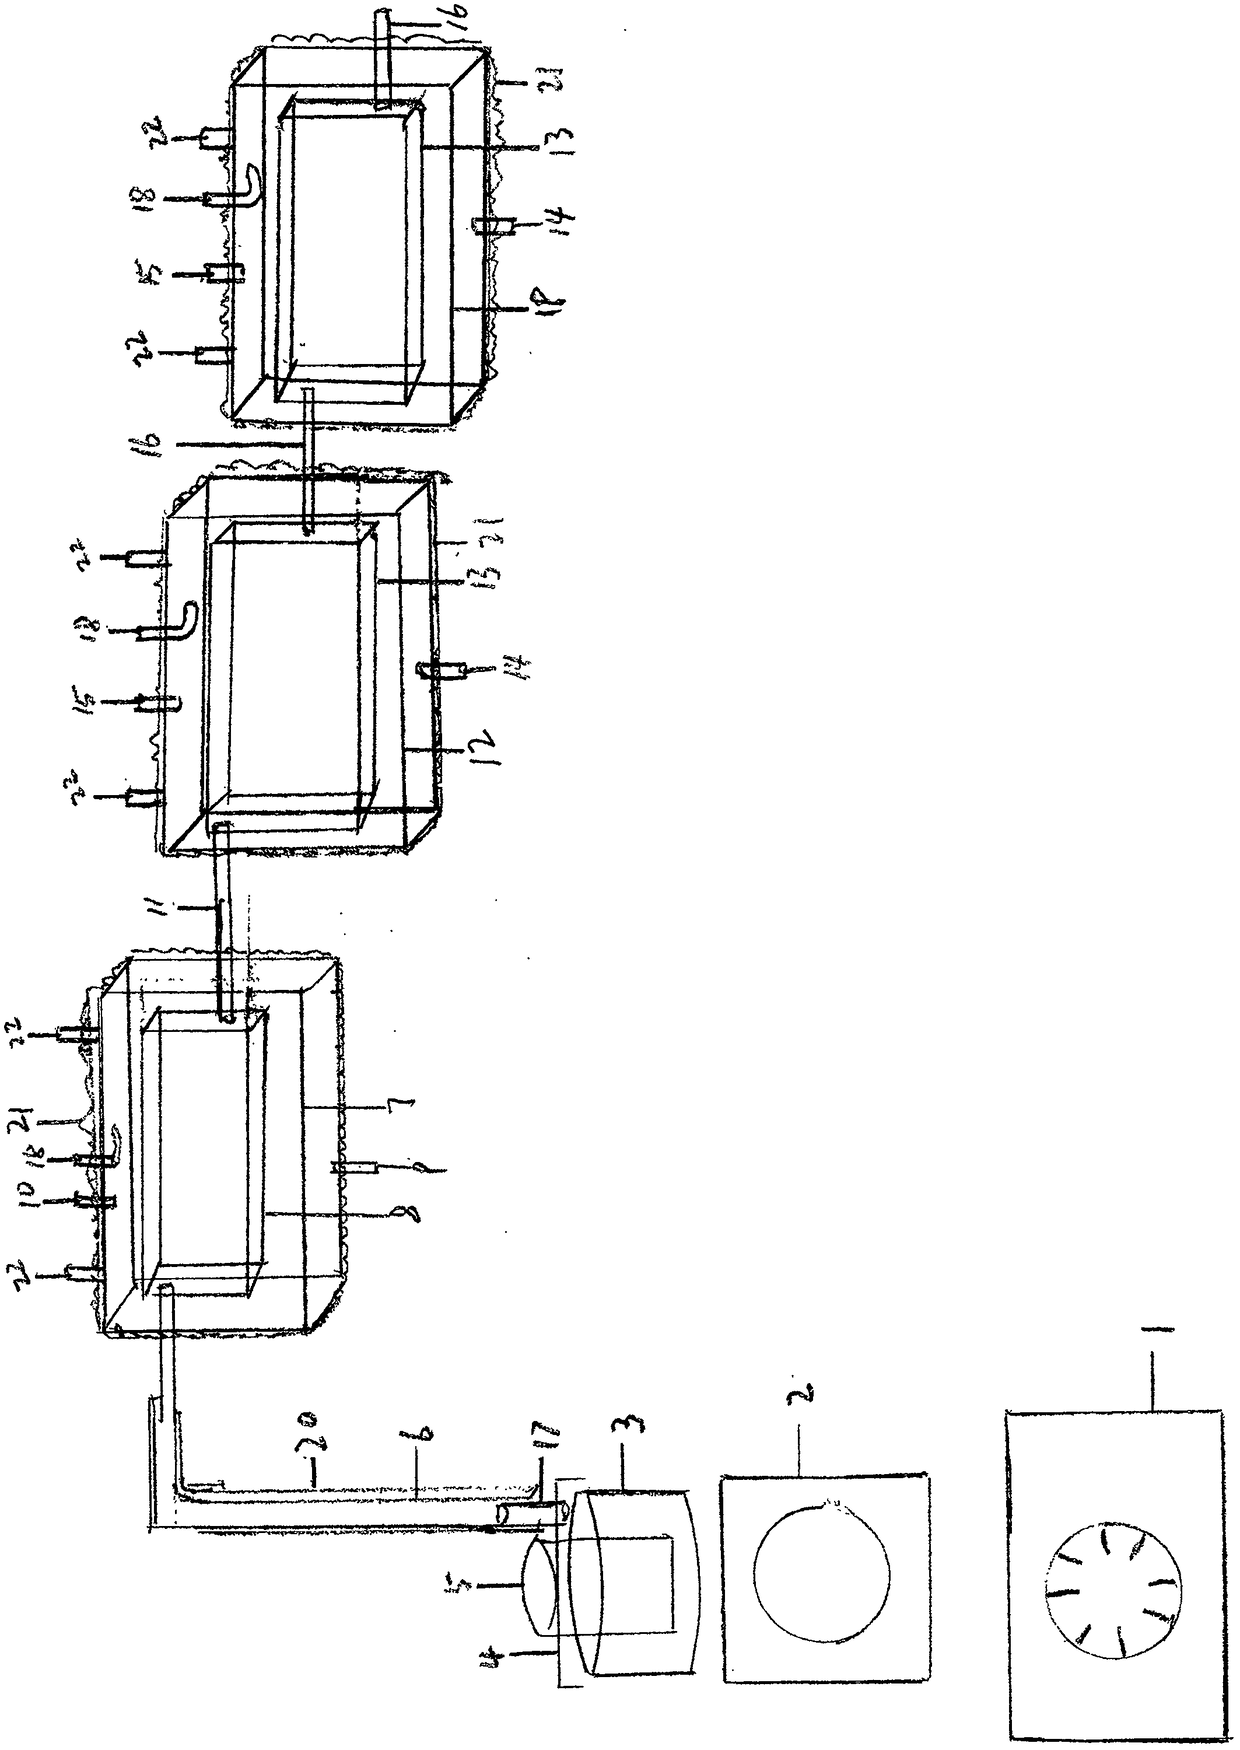 Water heater device without energy consumption